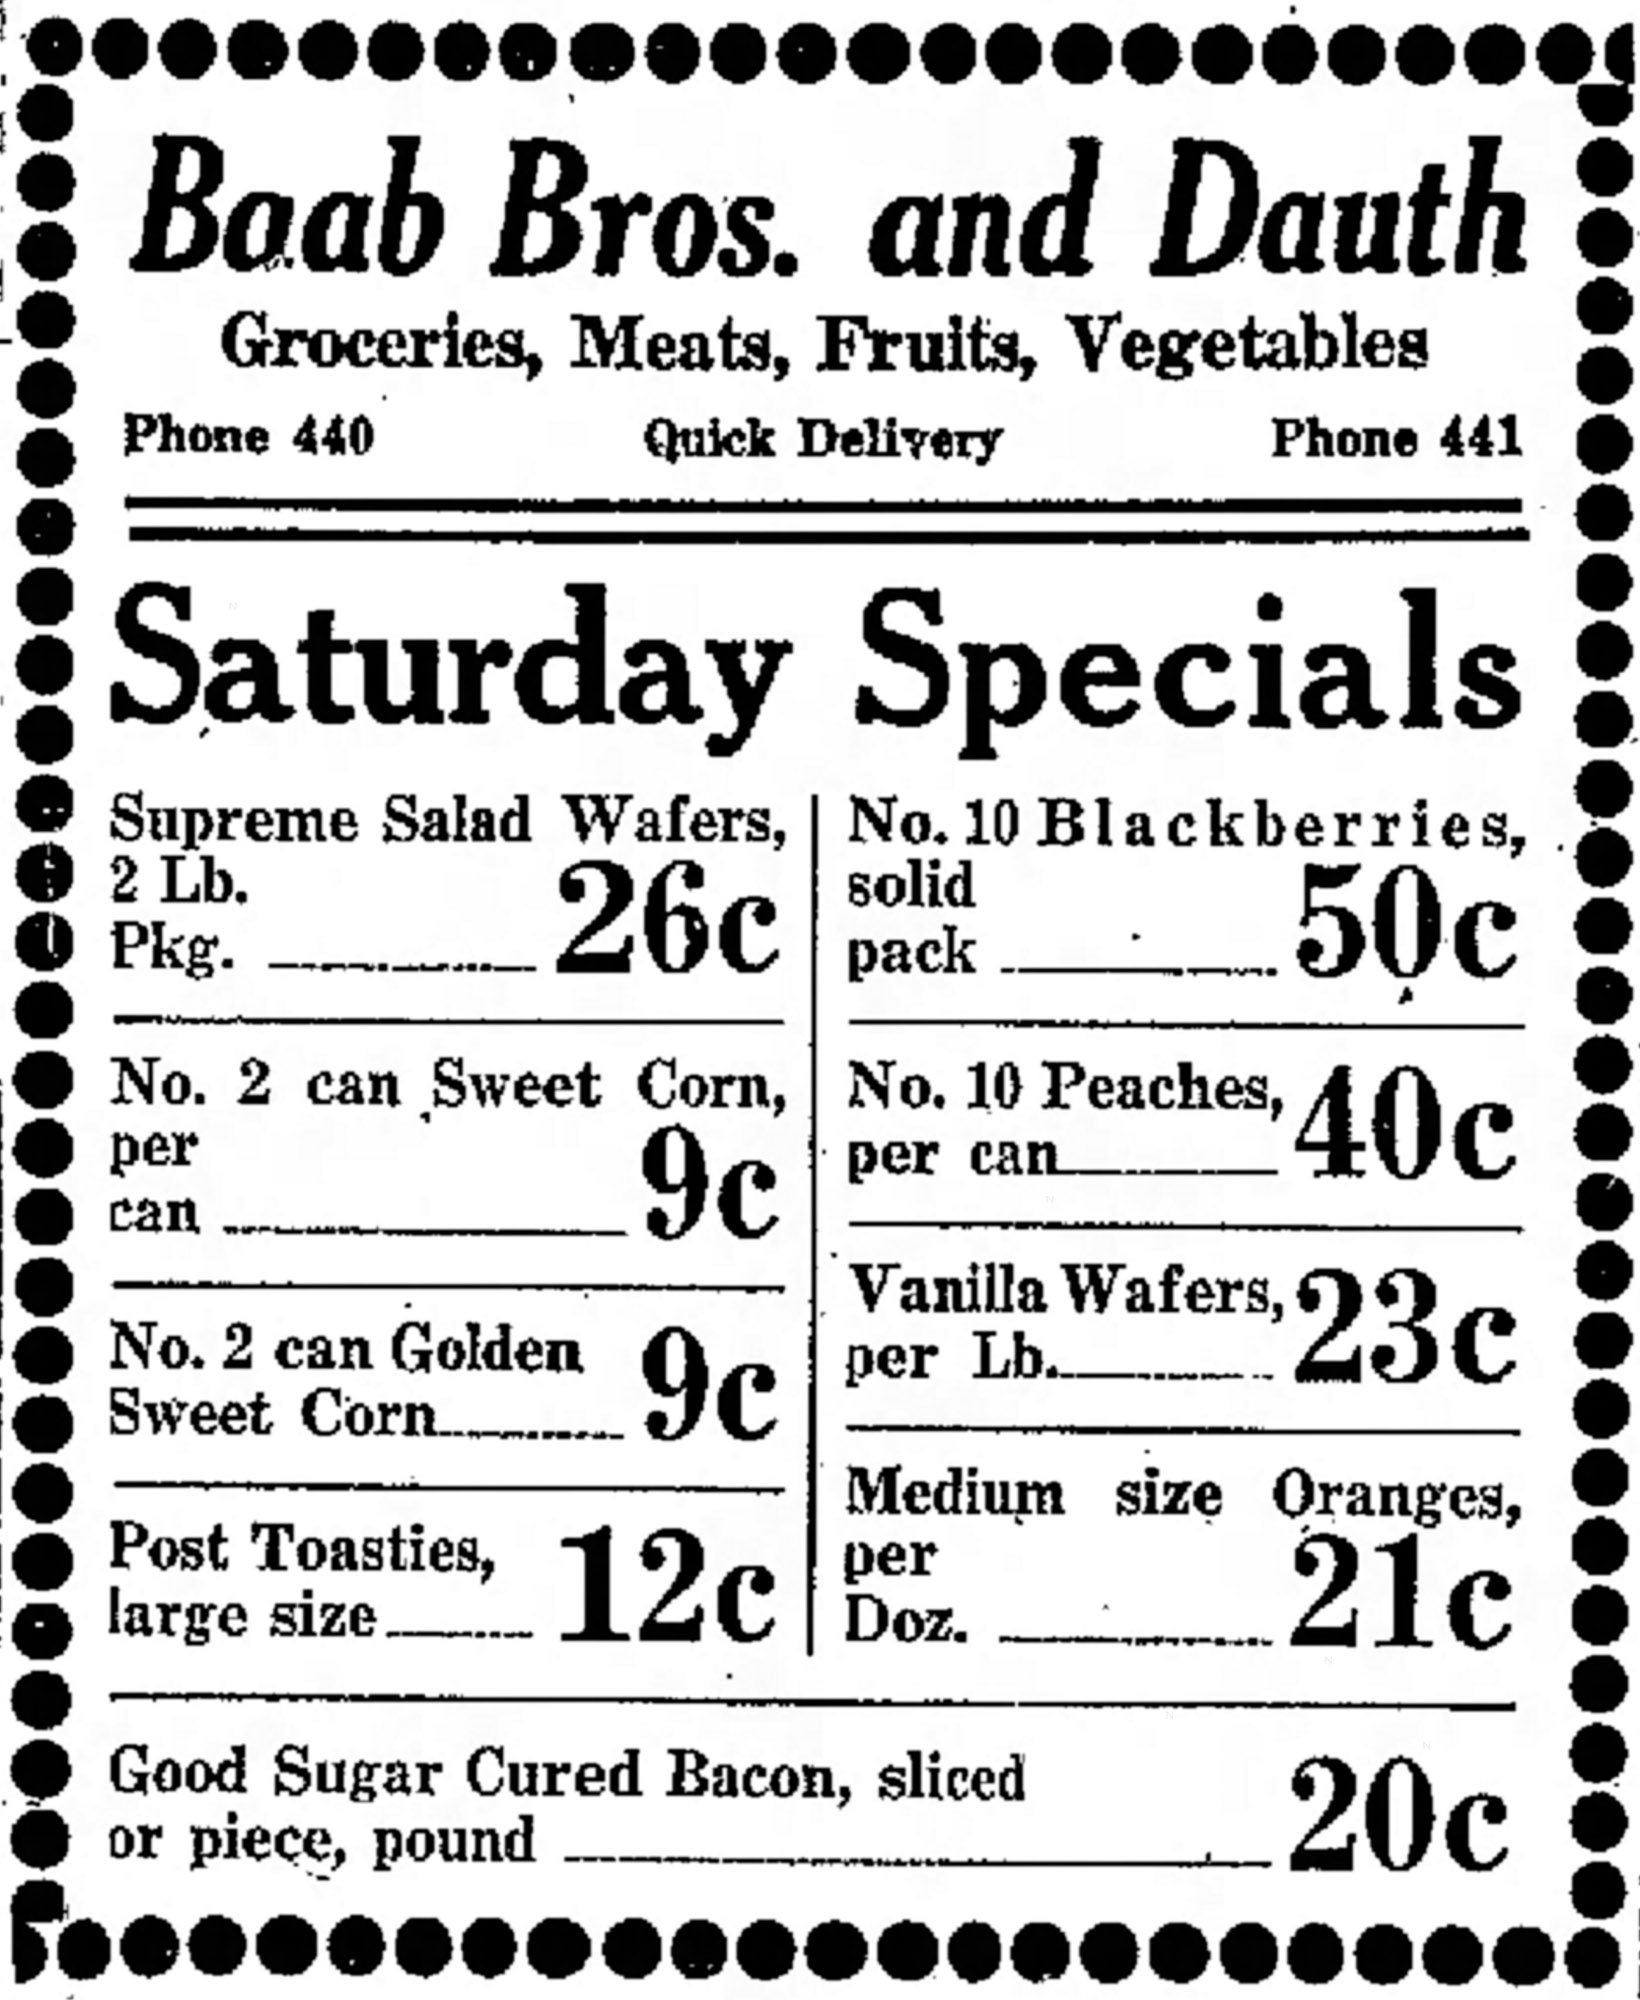 Dauth Family Archive - 1931-12-11 - Greeley Daily Tribune - Baab Bros and Dauth Advertisement